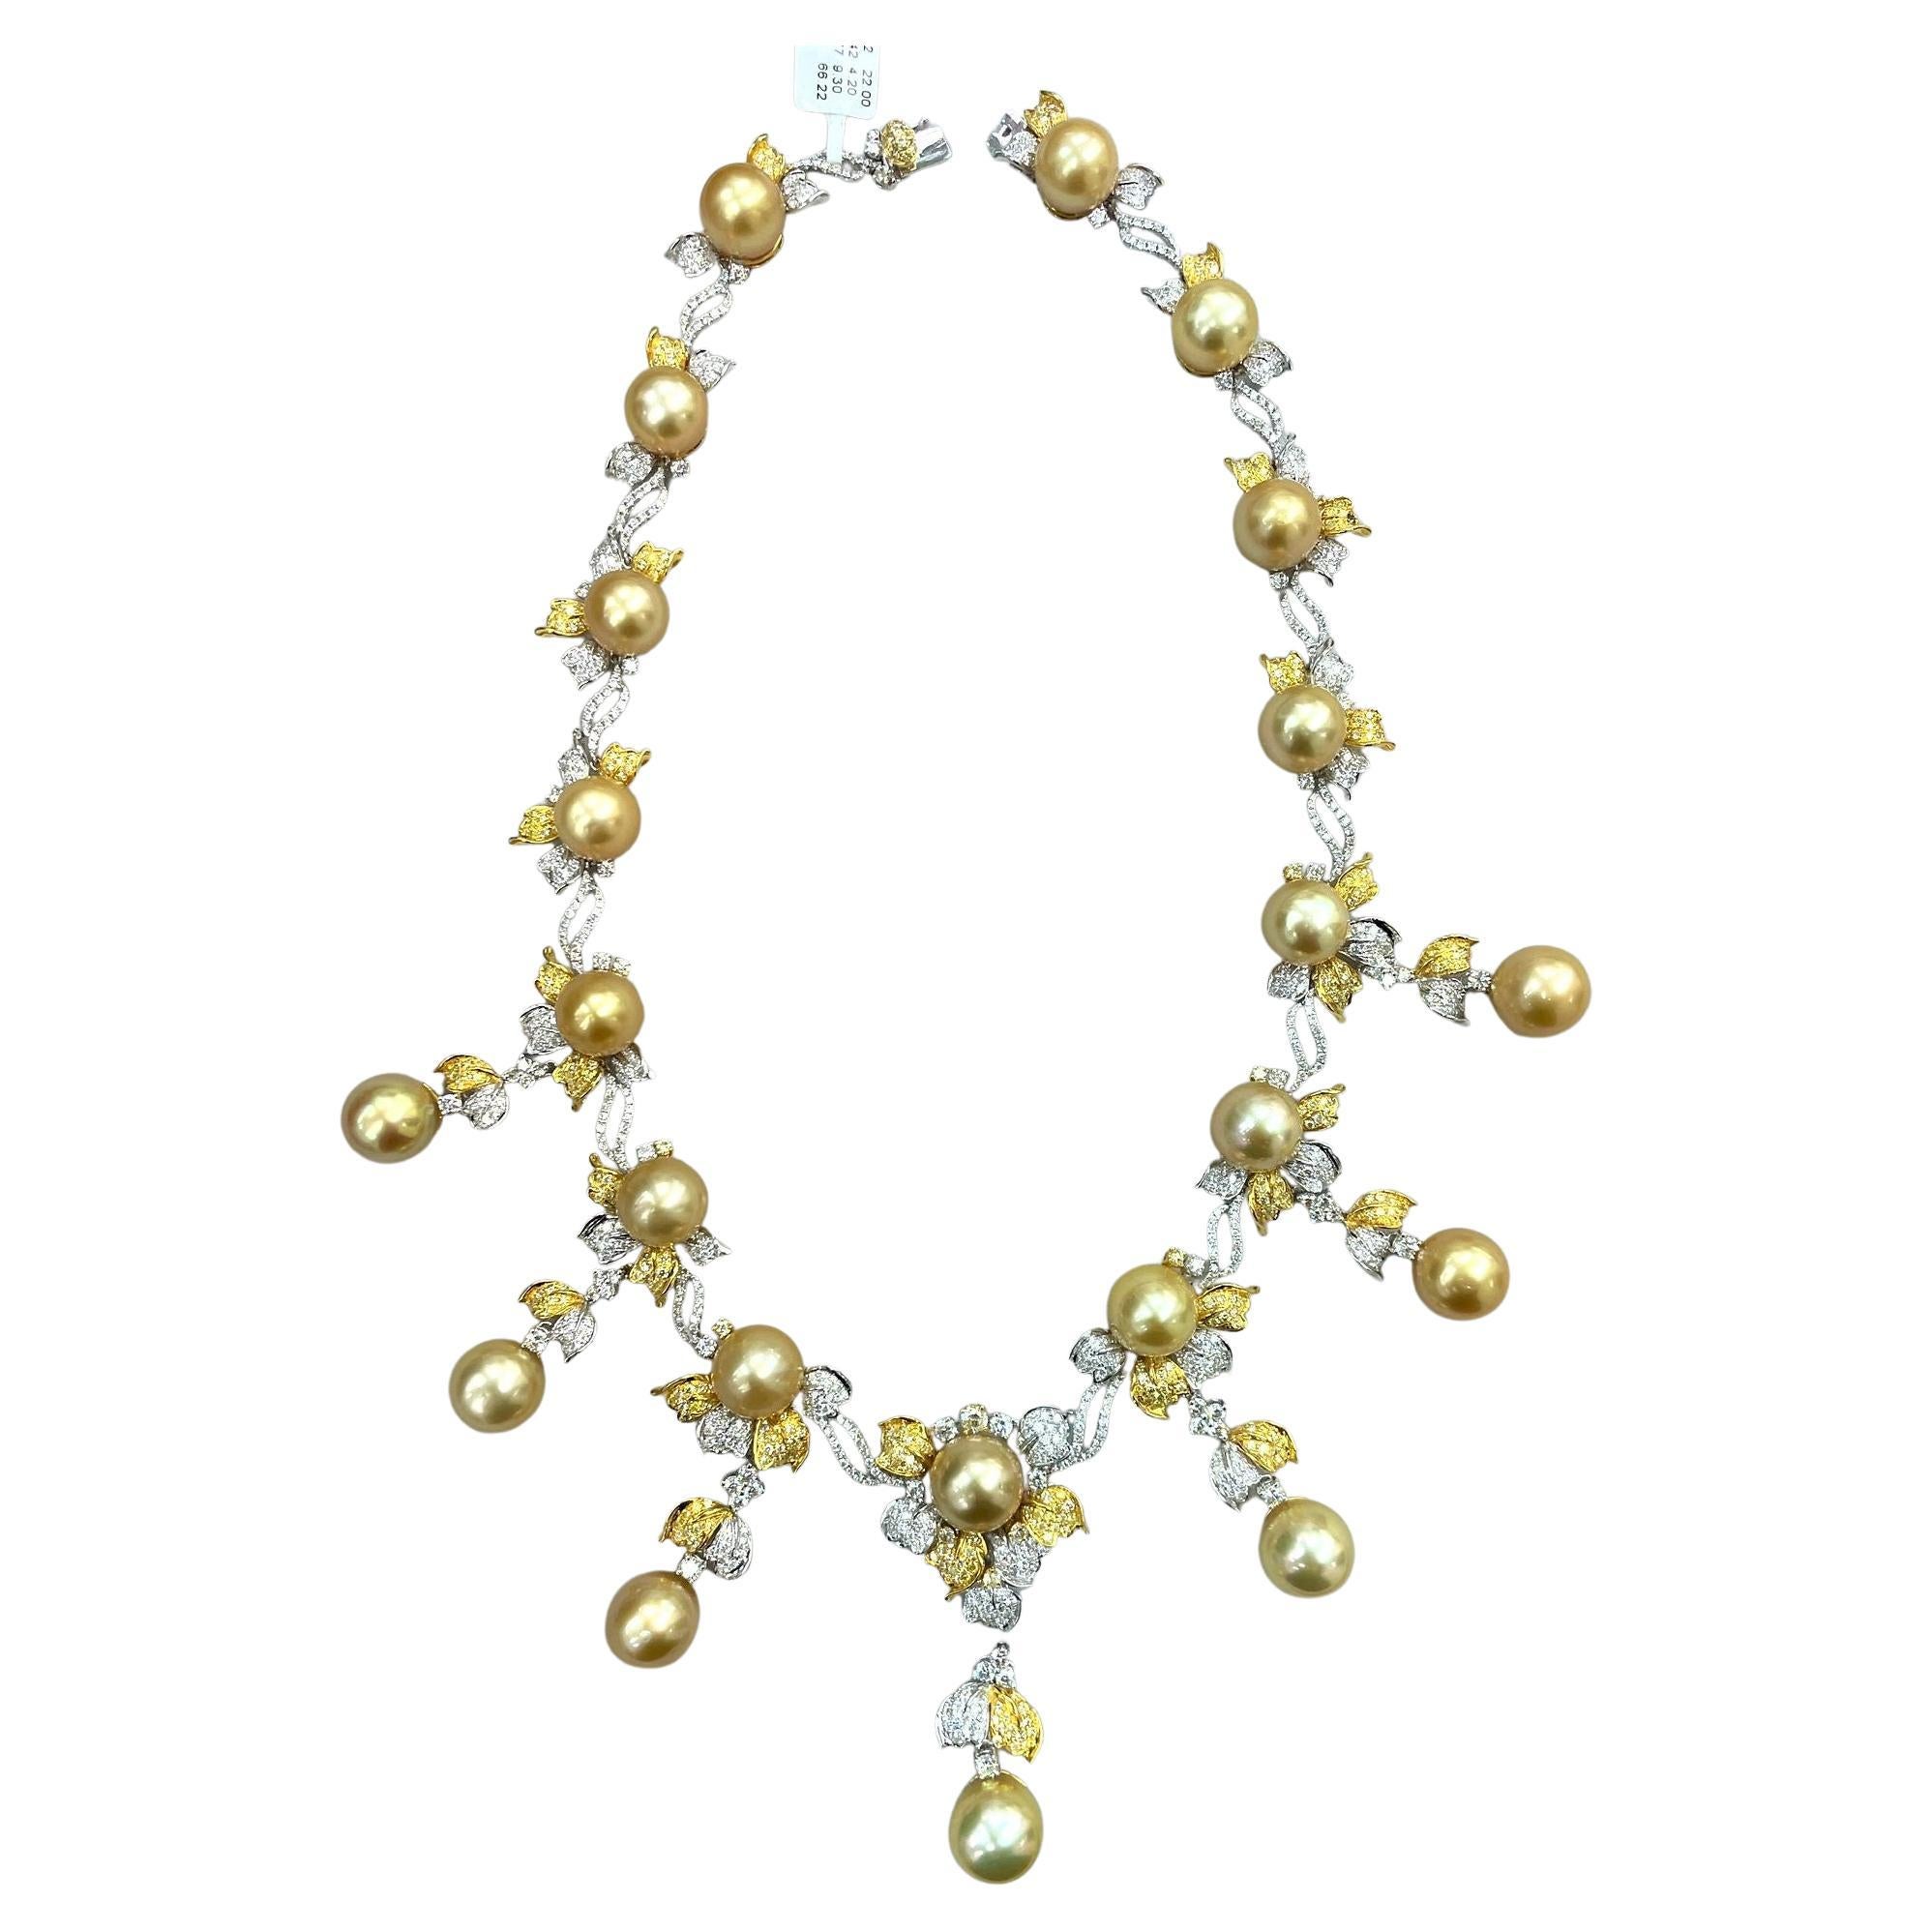 NWT $90, 000 Gorgeous 18KT Gold South Sea Golden Pearl Yellow Diamond Necklace For Sale